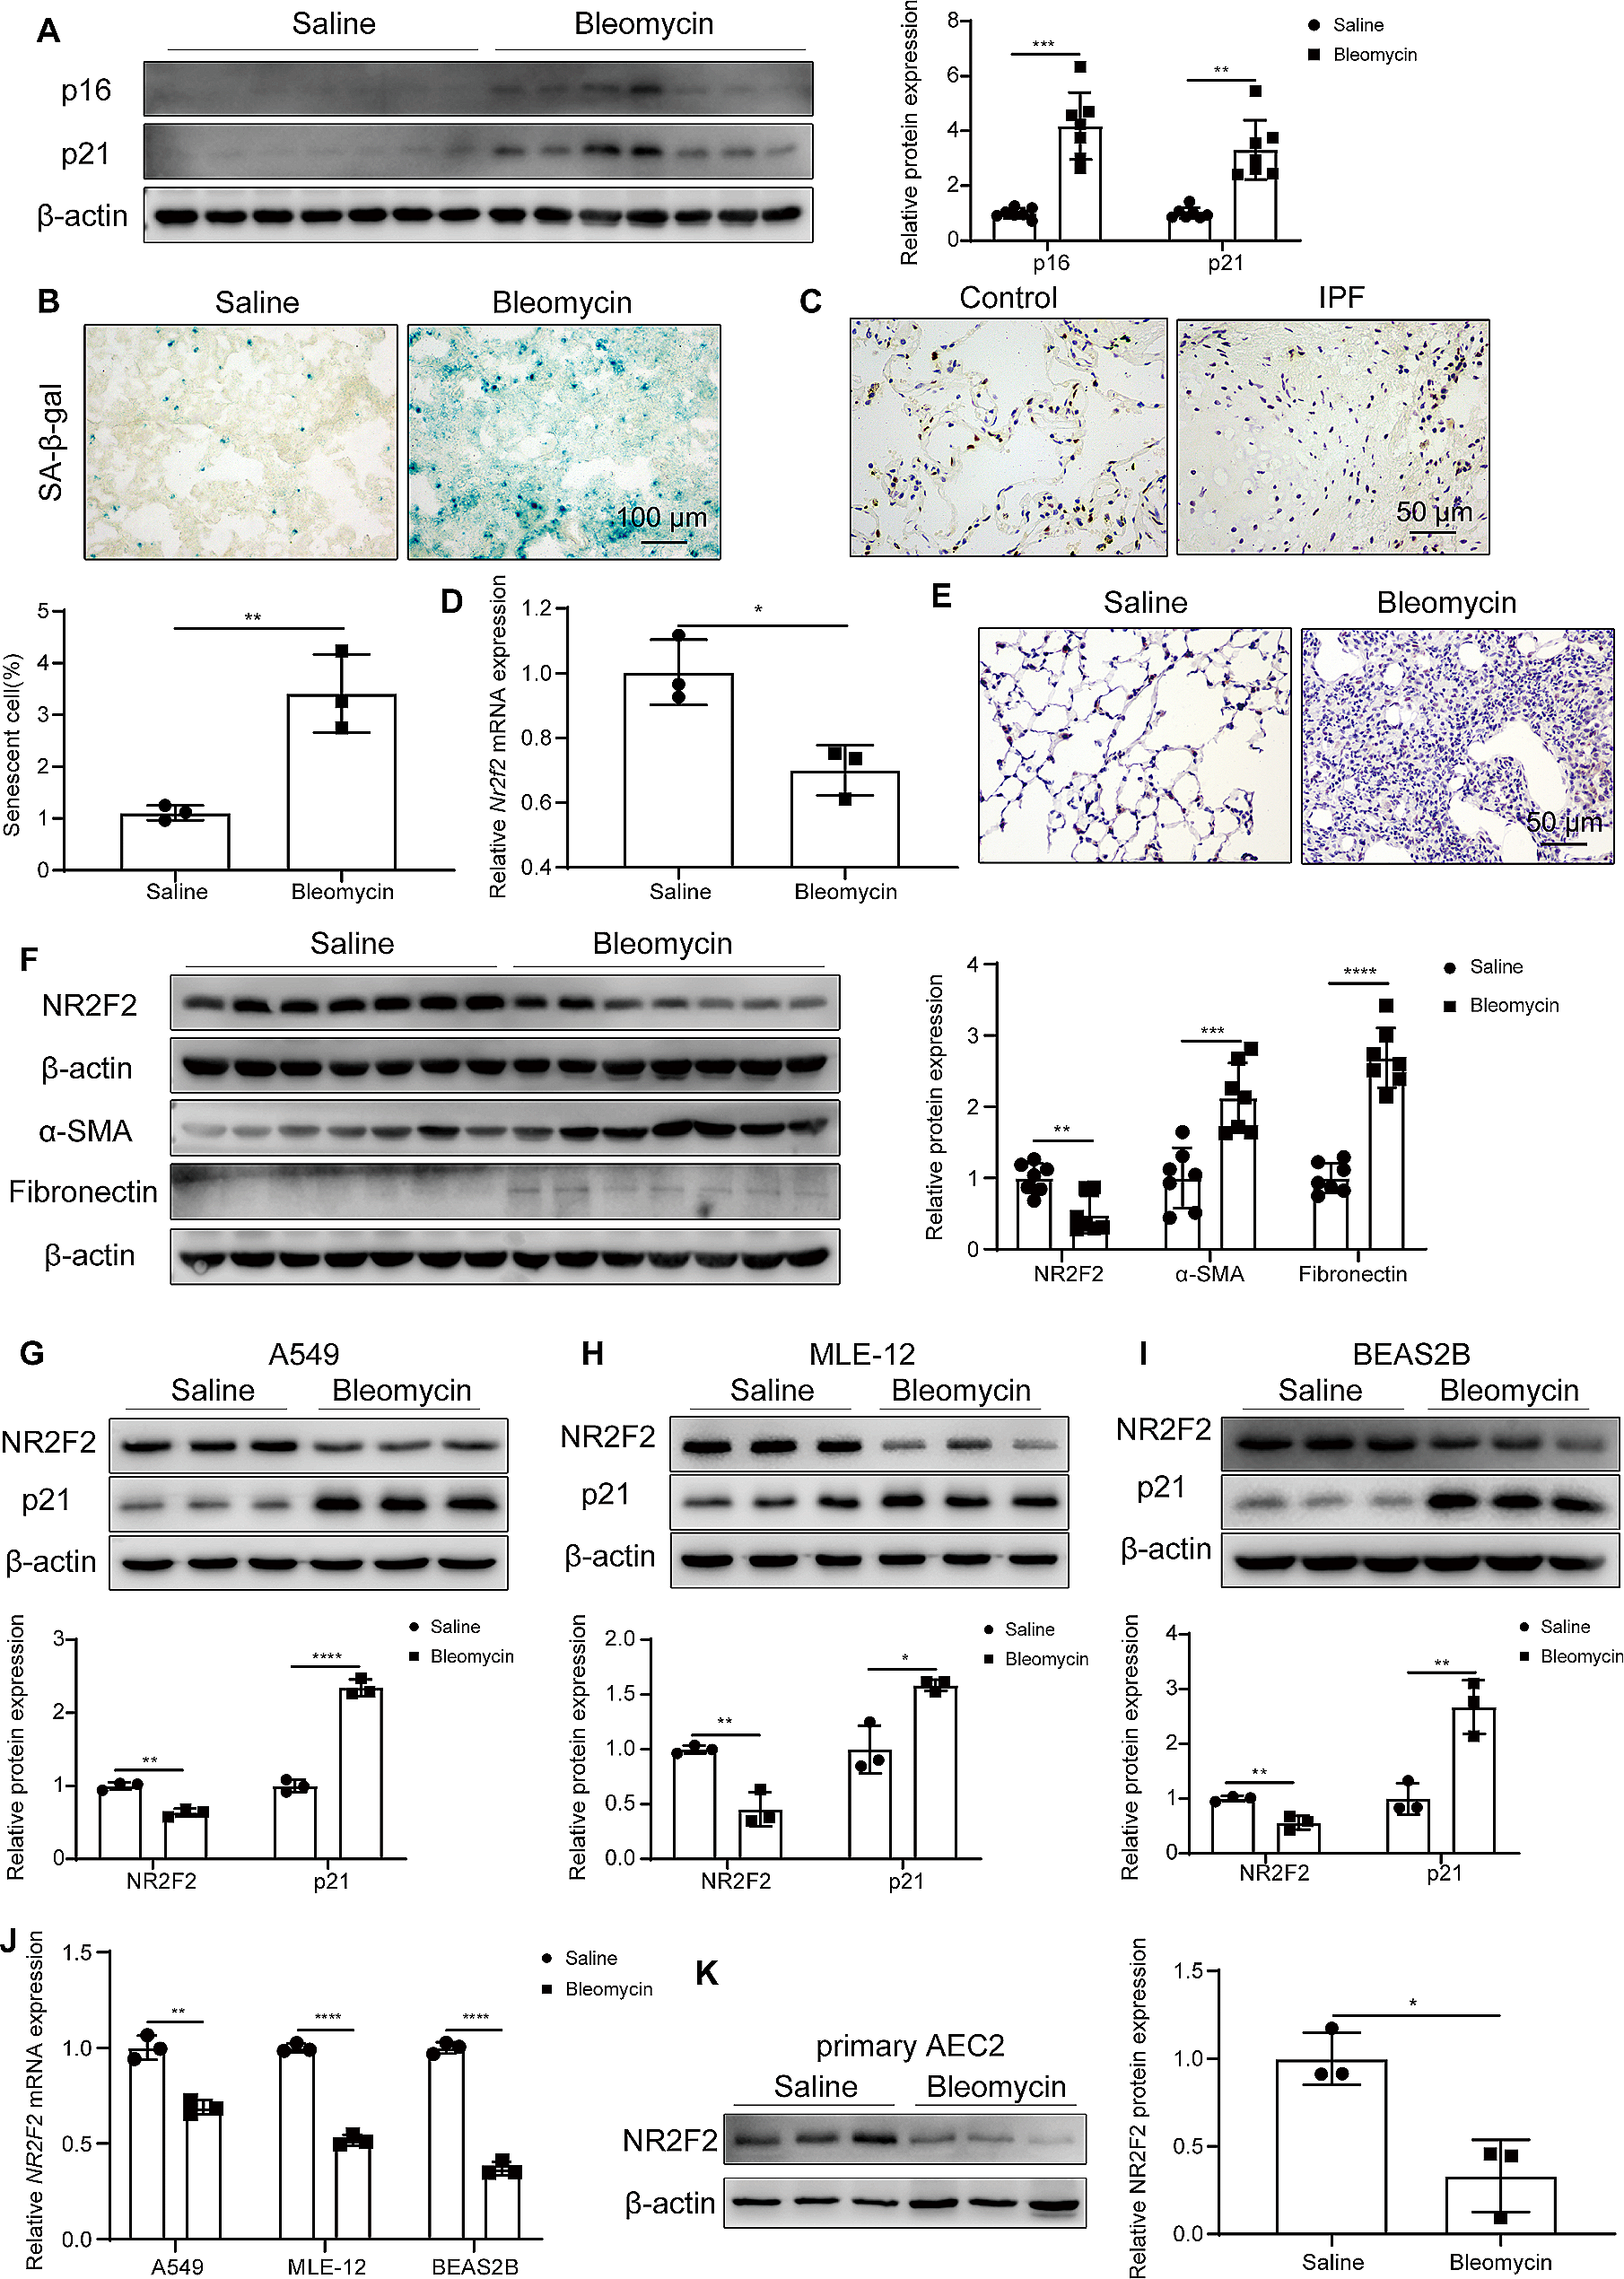 NR2F2 alleviates pulmonary fibrosis by inhibition of epithelial cell senescence